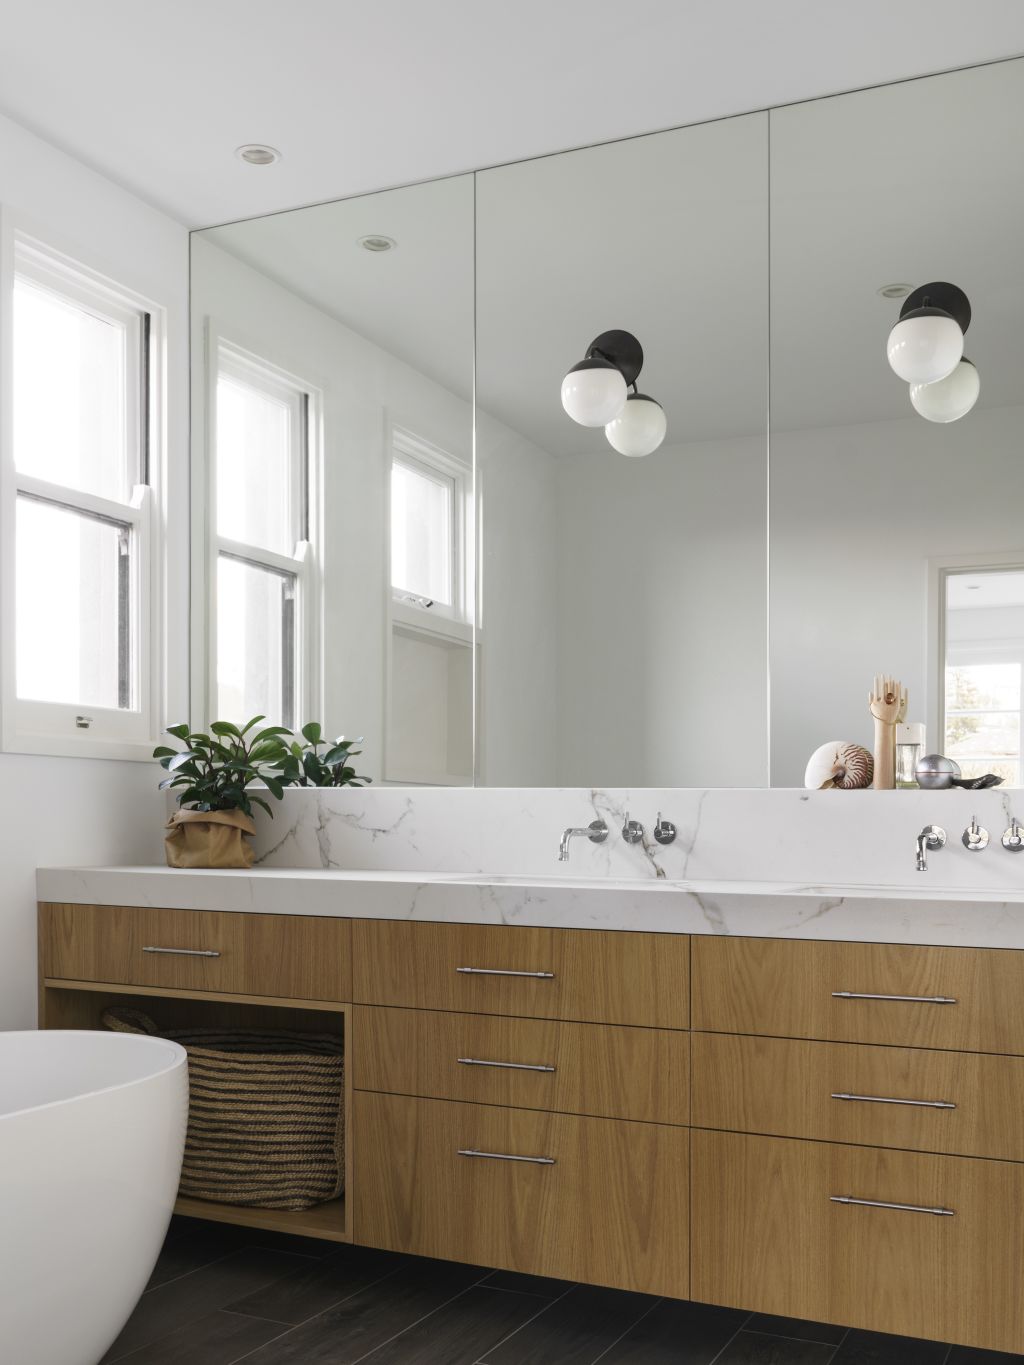 Timber can help to create a spa-like vibe. Photo: Justin Alexander / Anna-Carin Design Studio.